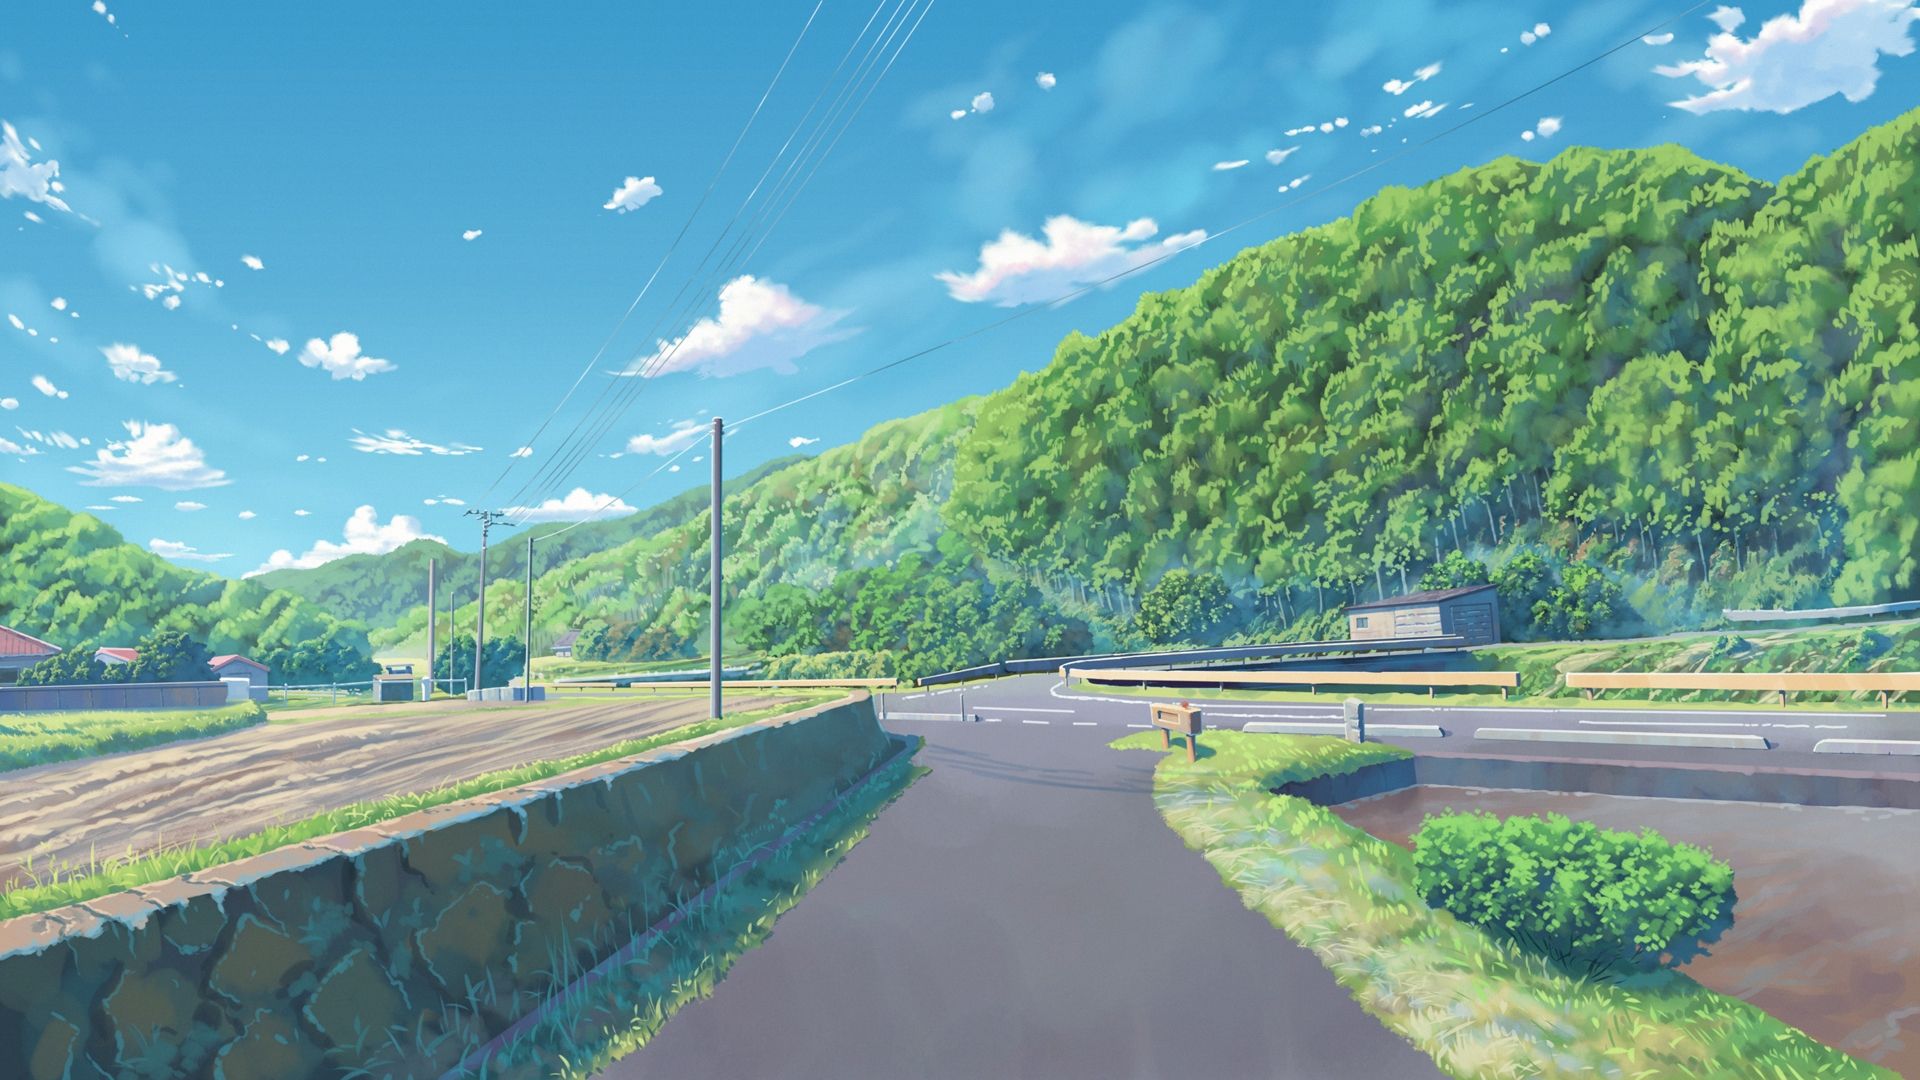 Download 1920x1080 Anime Landscape, Road, Trees, Sky, Clouds